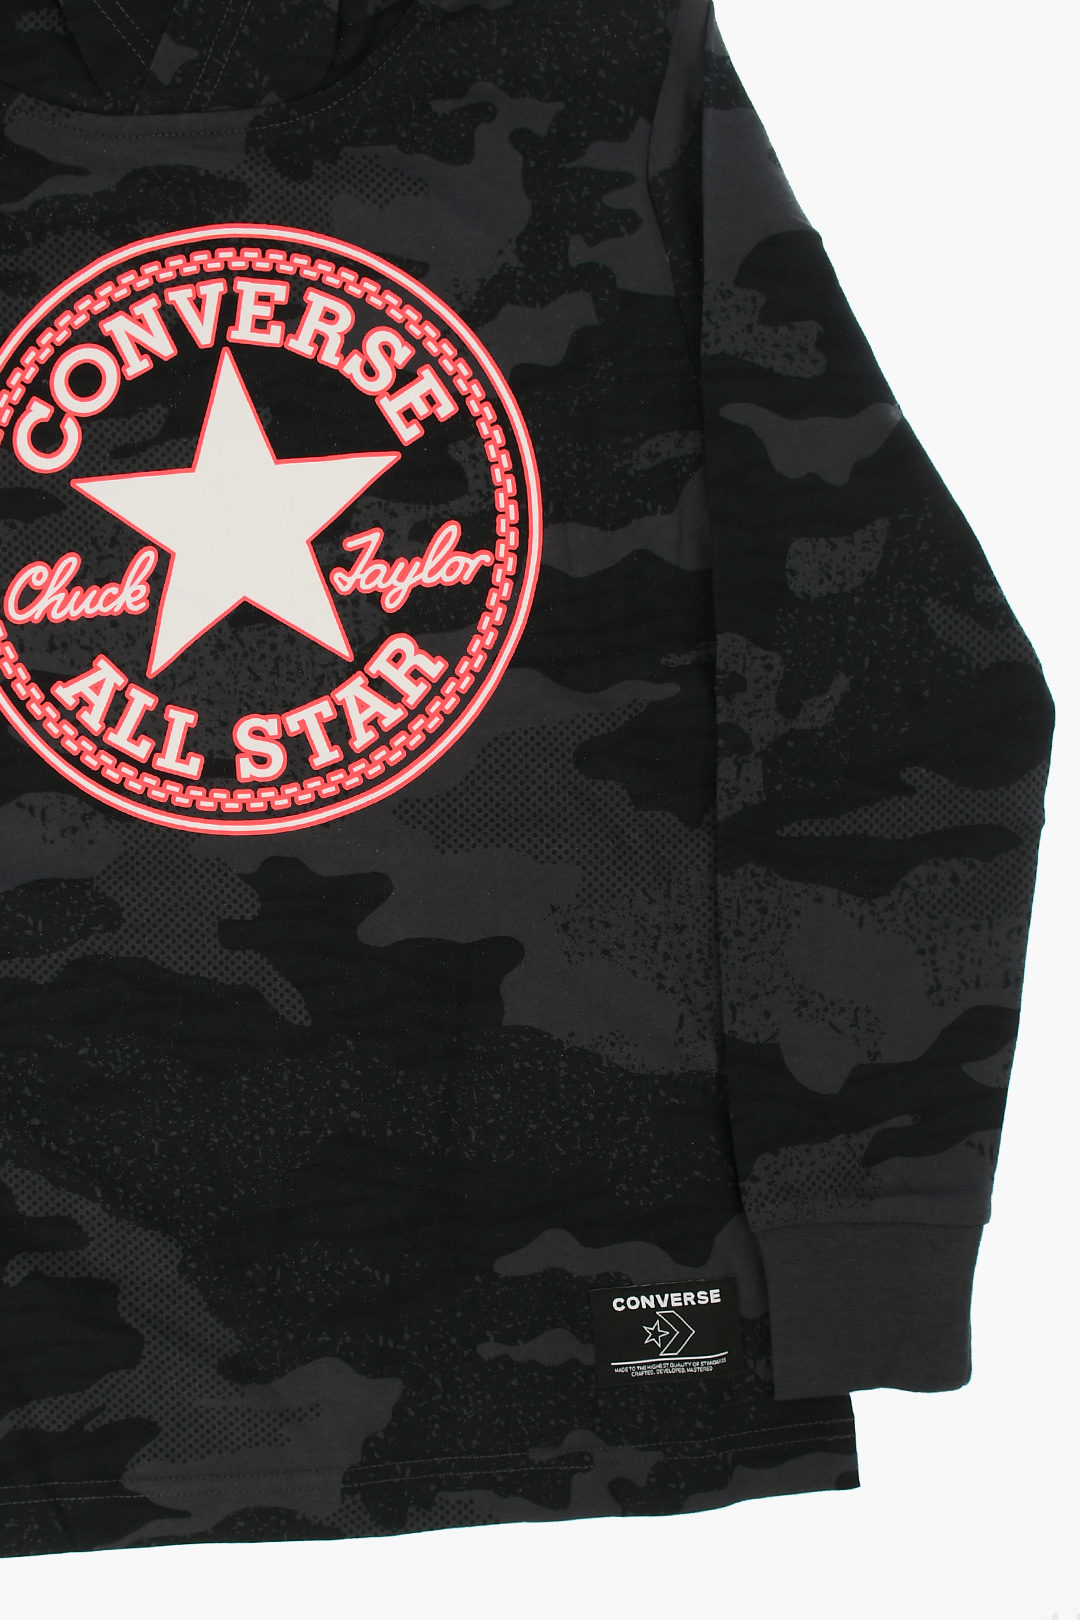 converse camouflage t shirt